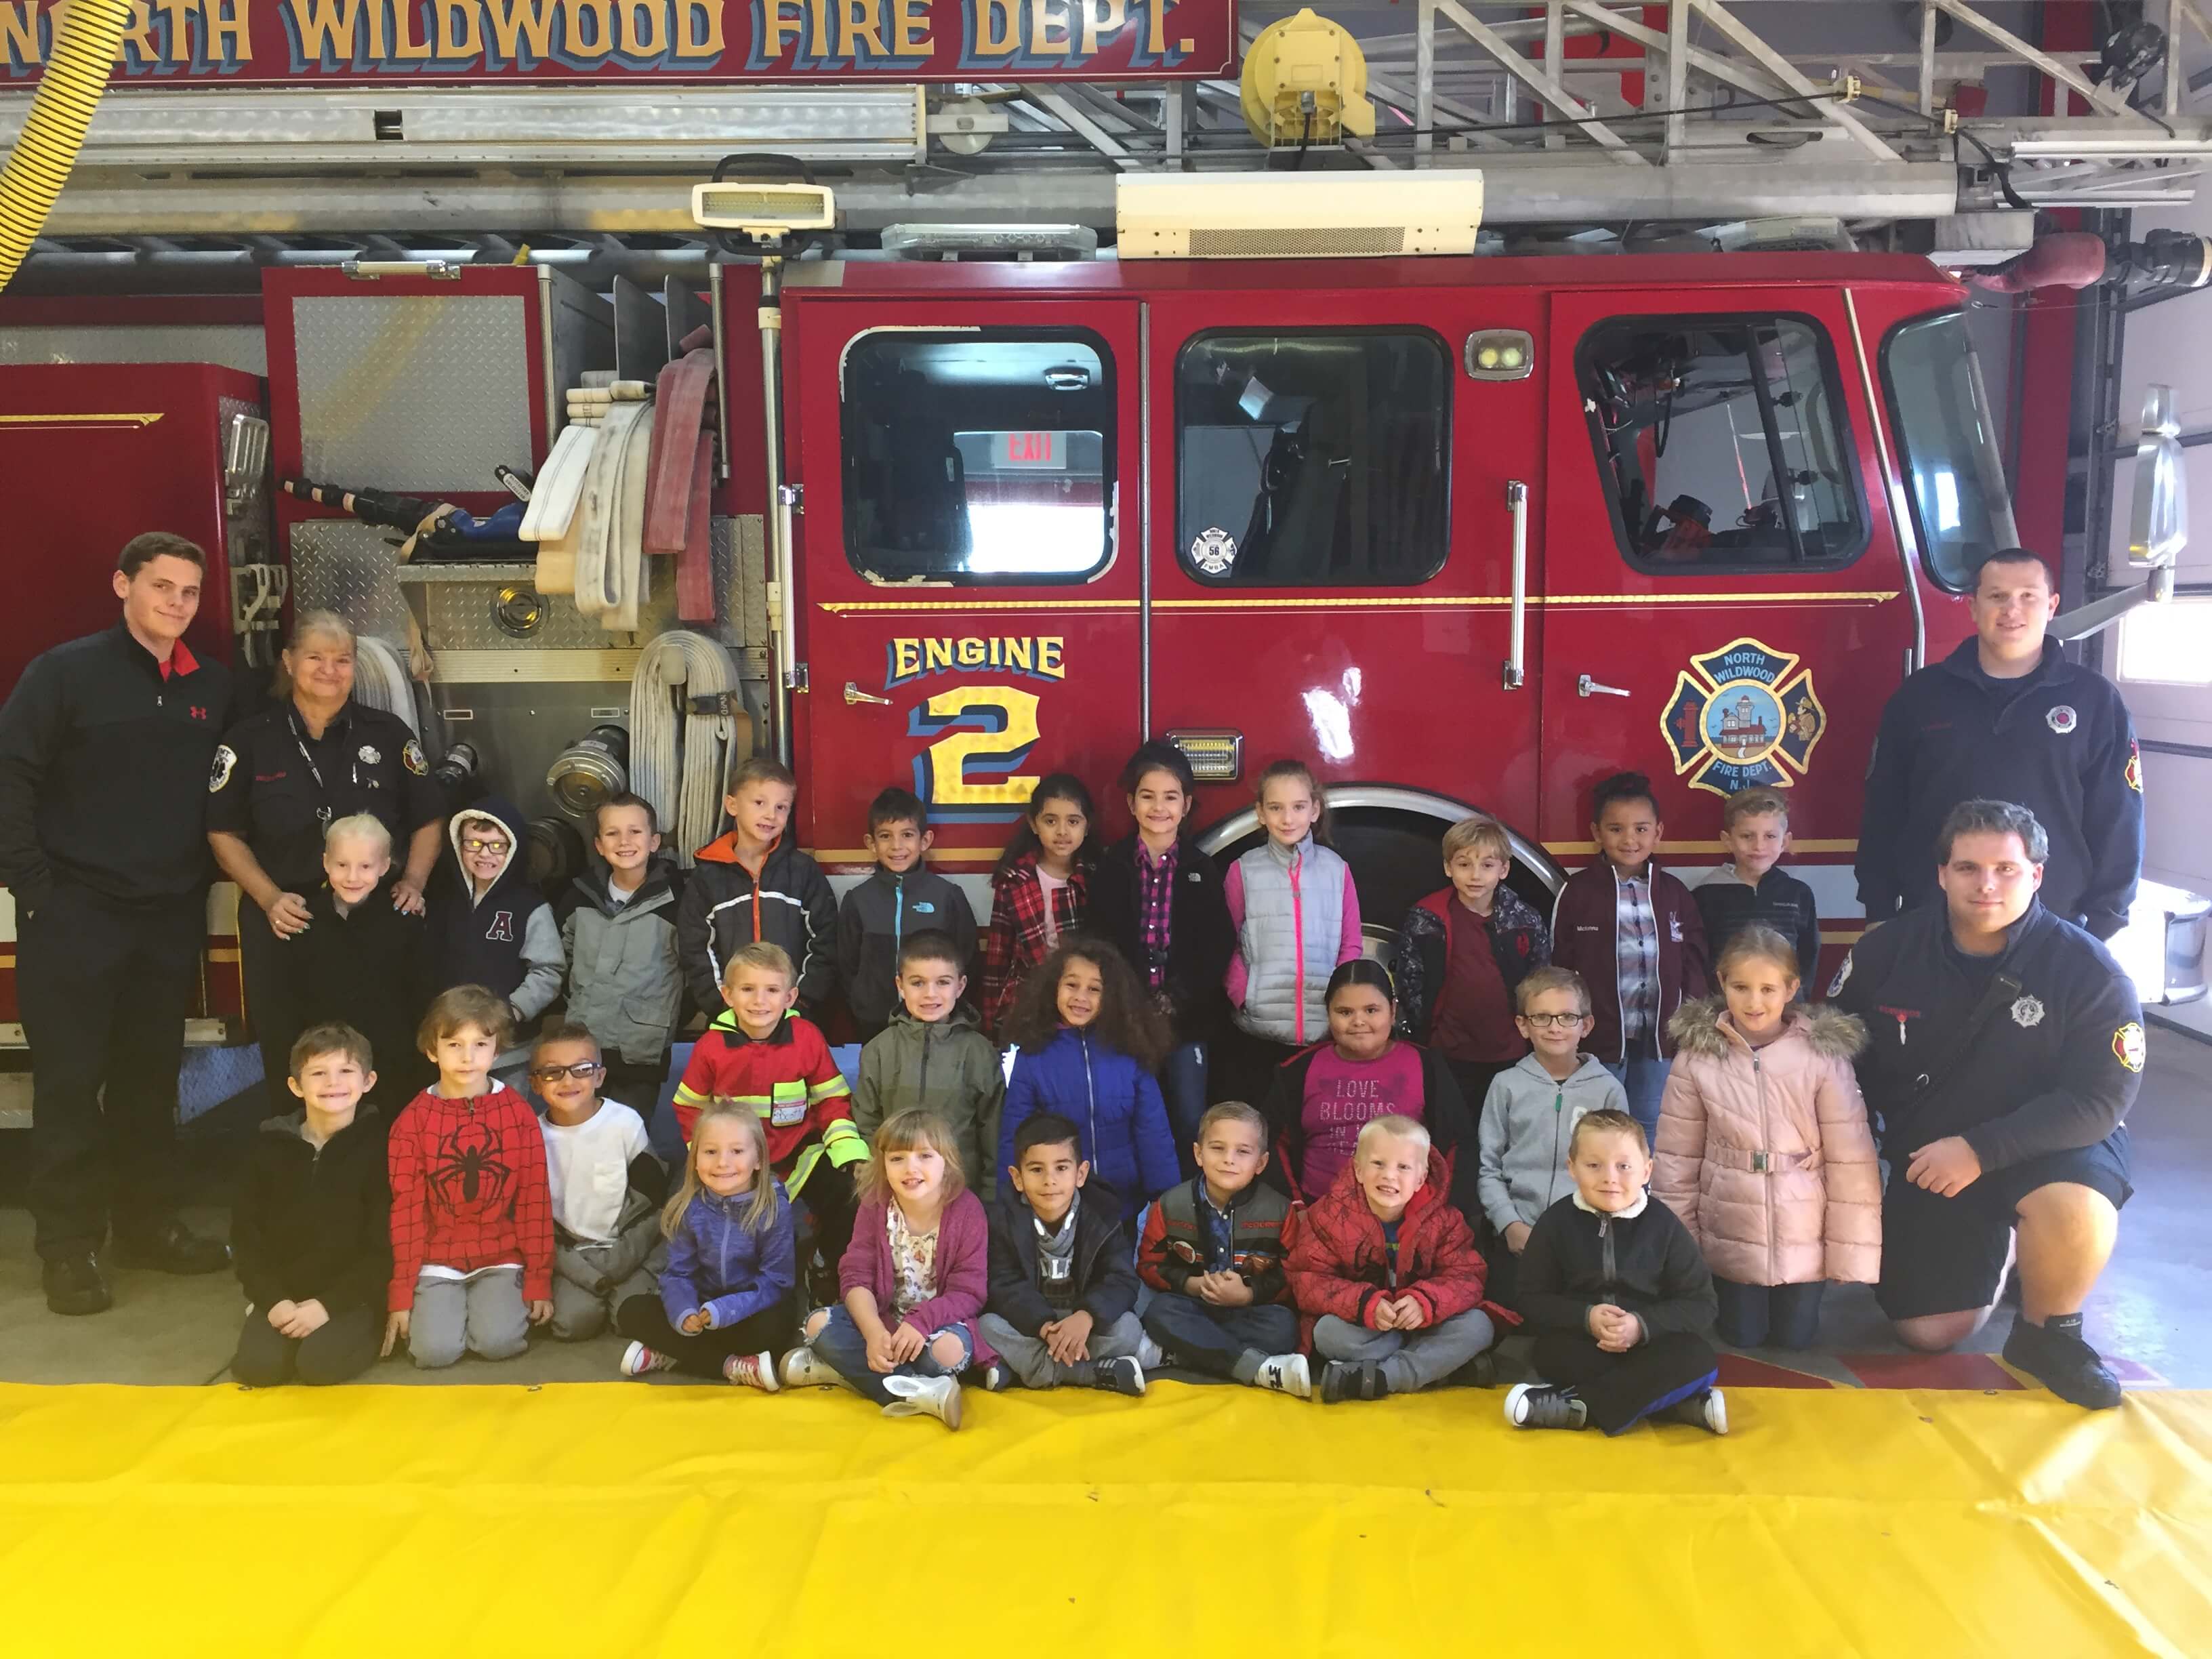 Margaret Mace kindergarten and first grade students pictured with members of the North Wildwood Fire Department.